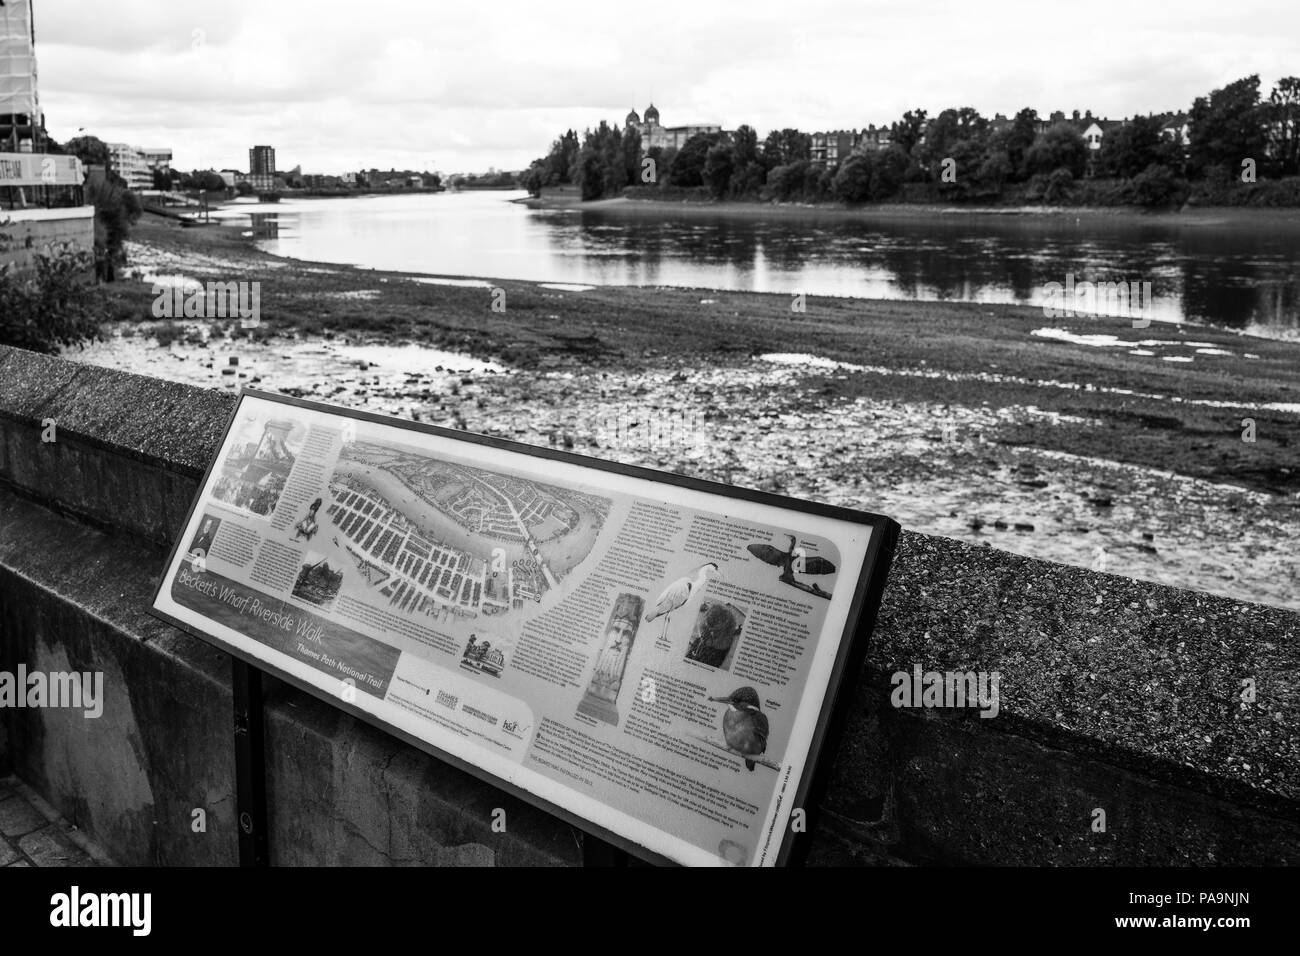 Hammersmith, Greater London, looking over Fulham Reach towards,  Harrods Depository  [AKA 'Harrods Village'. William Hunt Mansions,]  Pictorial information plaque, of Riverside Birdlife, Chiswick Mall and embankment  Leading from Chiswick to Fulham Reach RC. Sunday.  24.07.2016 © Peter SPURRIER Stock Photo